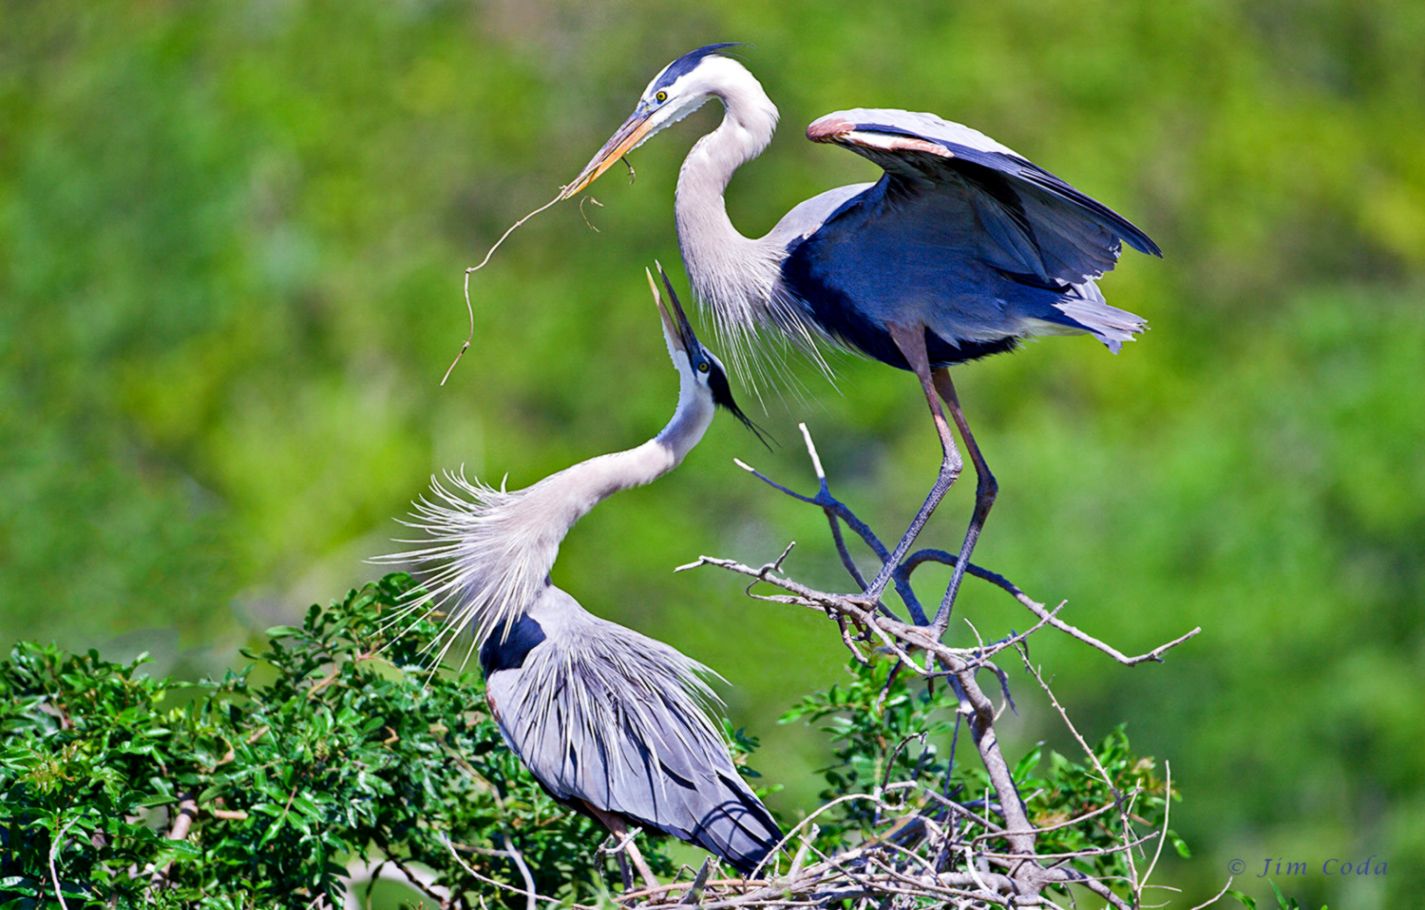 Blue Heron Images  Free Photos PNG Stickers Wallpapers  Backgrounds   rawpixel